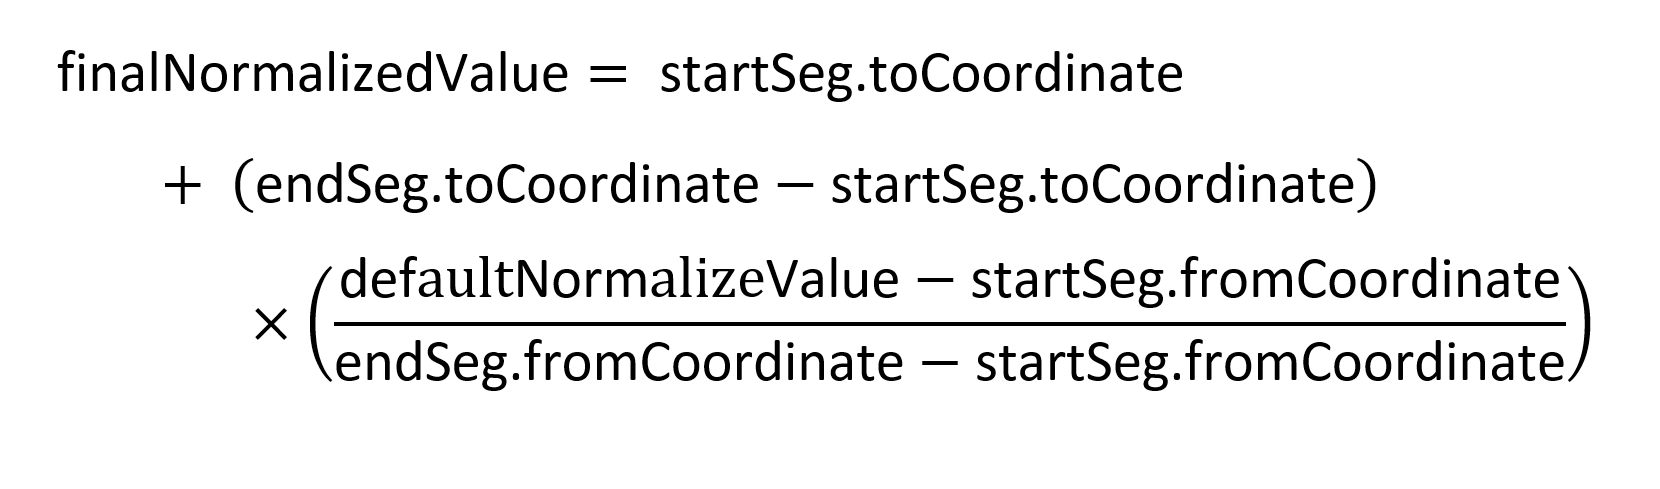 Screenshot that shows the equation to find the final modified normalized value.